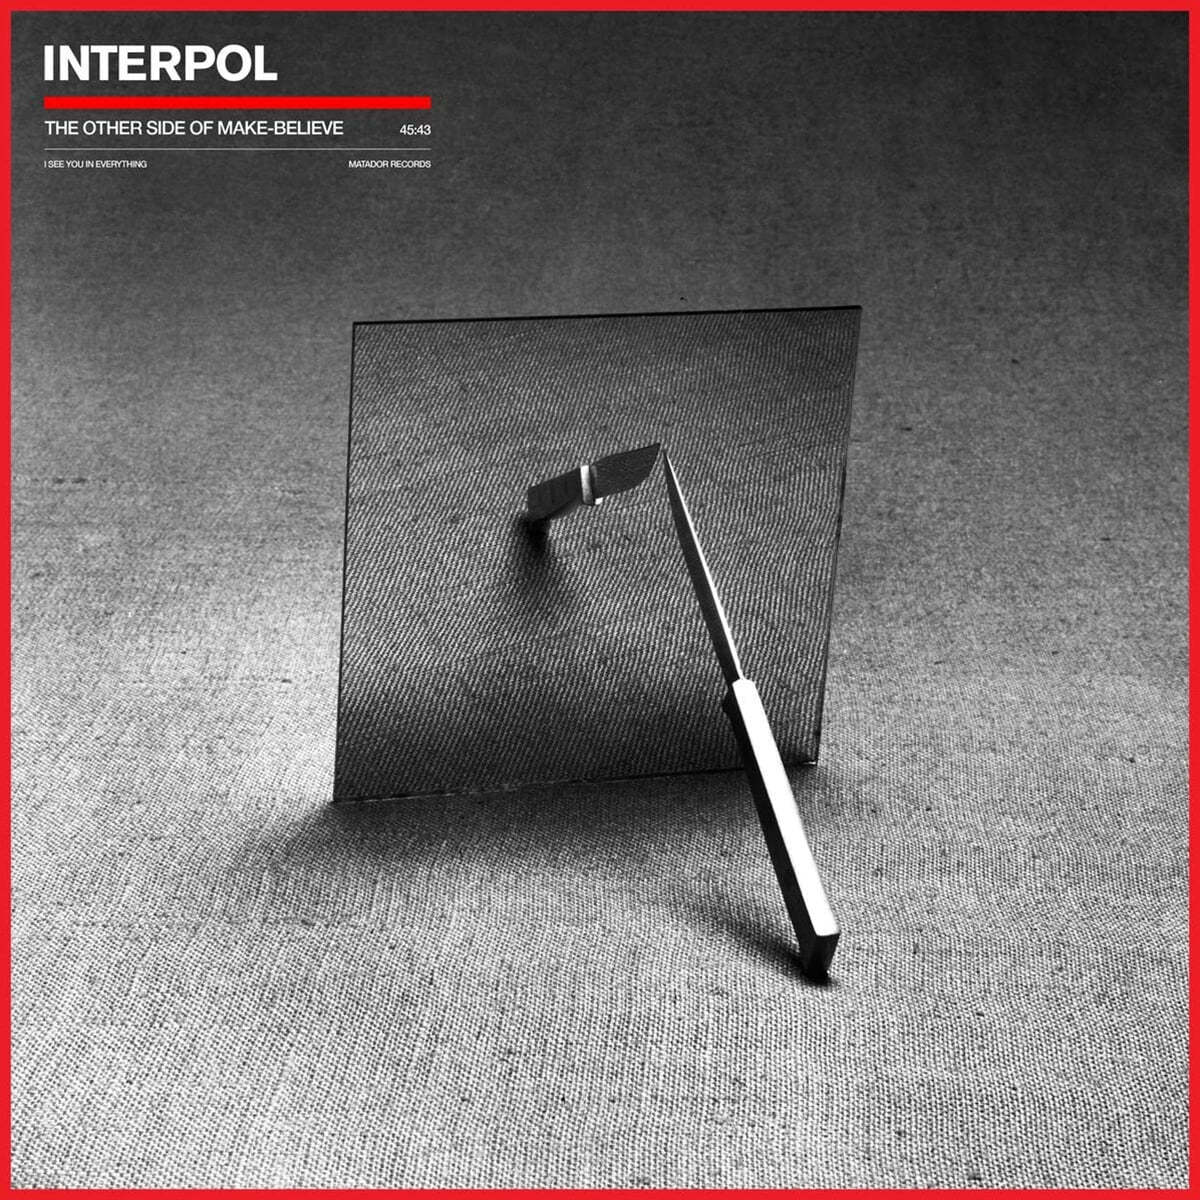 Interpol (인터폴) - 7집 The Other Side Of Make Believe